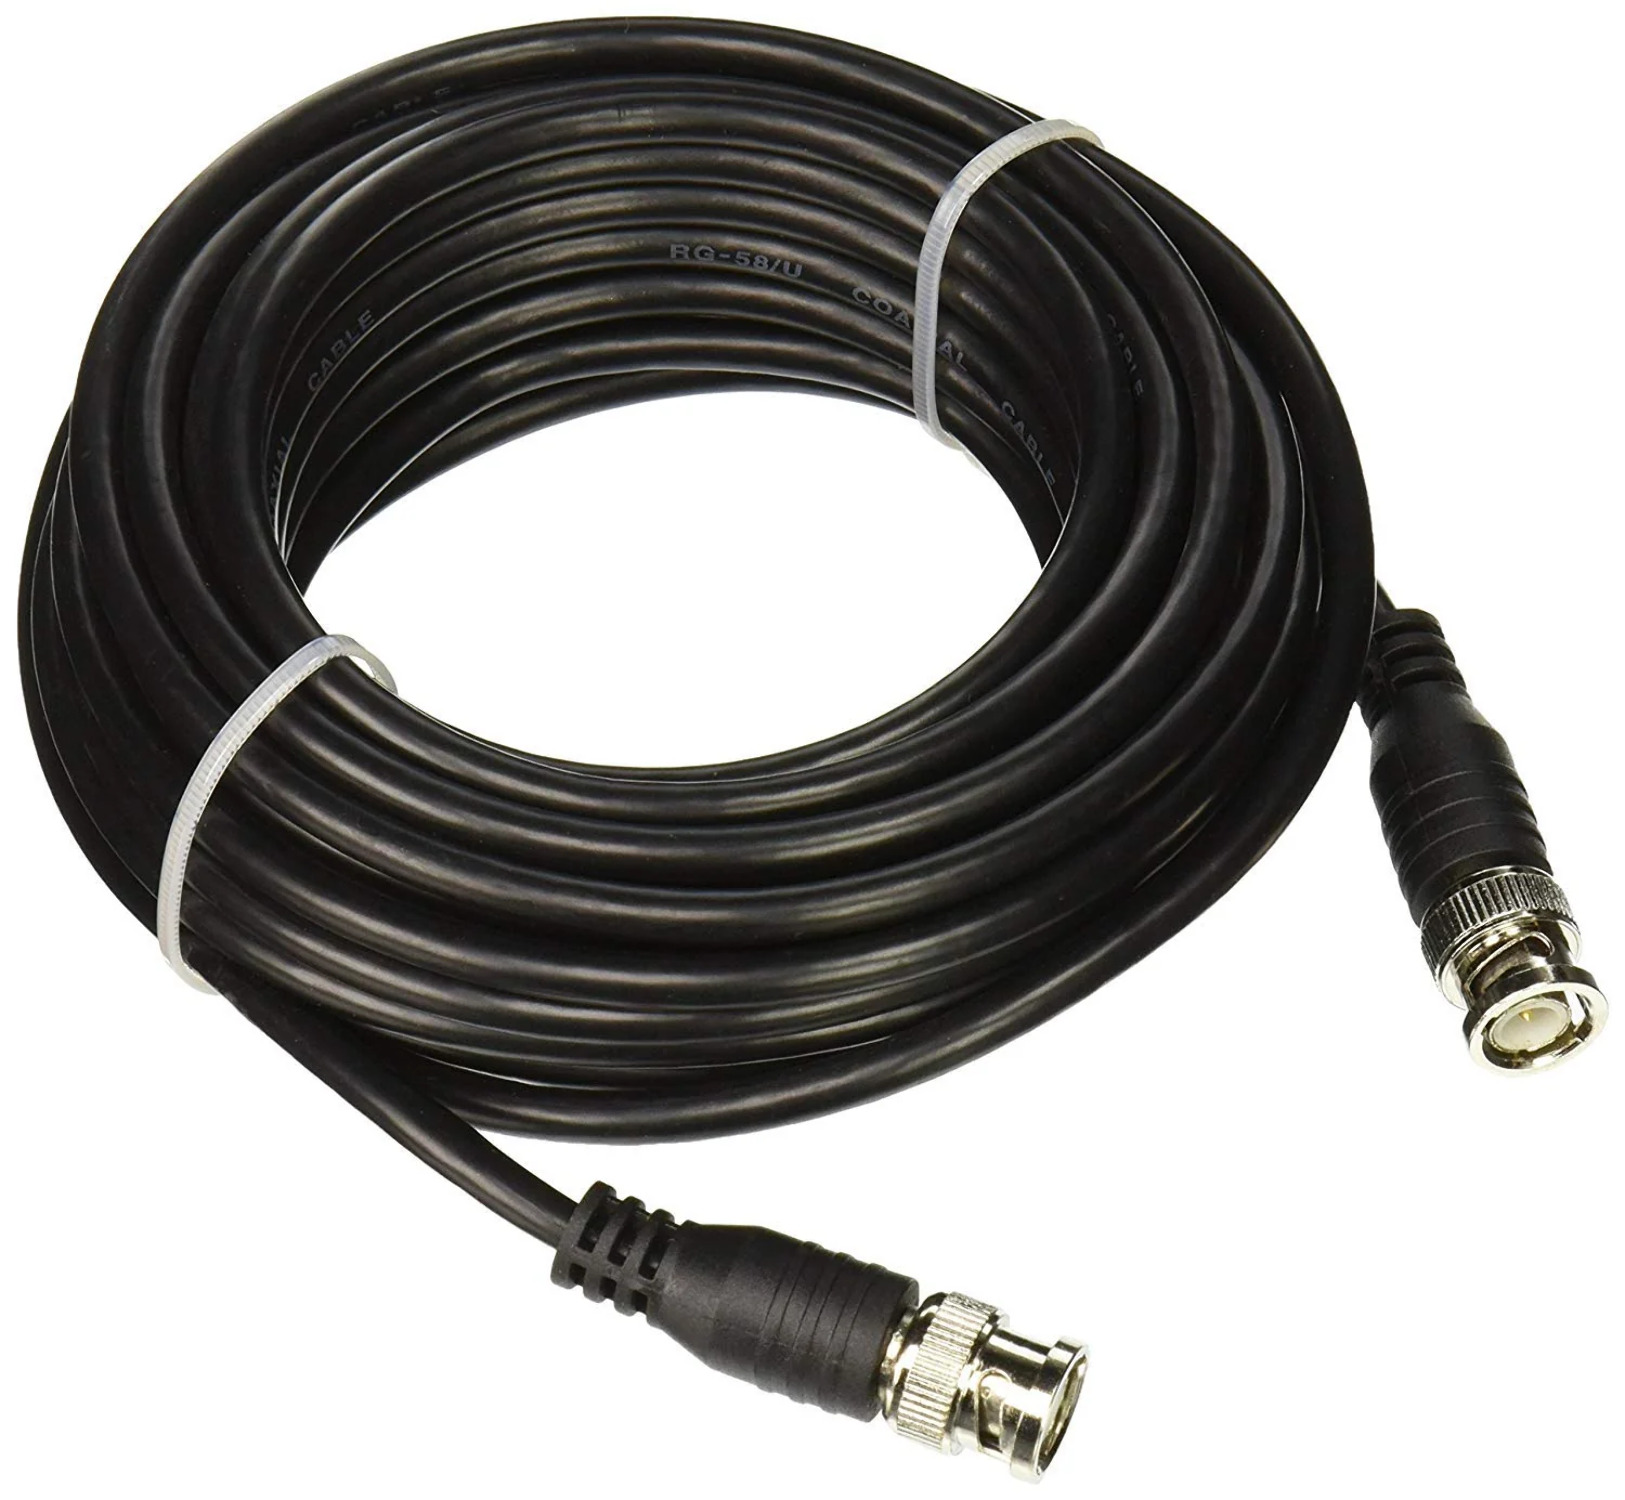 Steren 15ft BNC-BNC RG58 Coaxial Cable - image 3 of 3